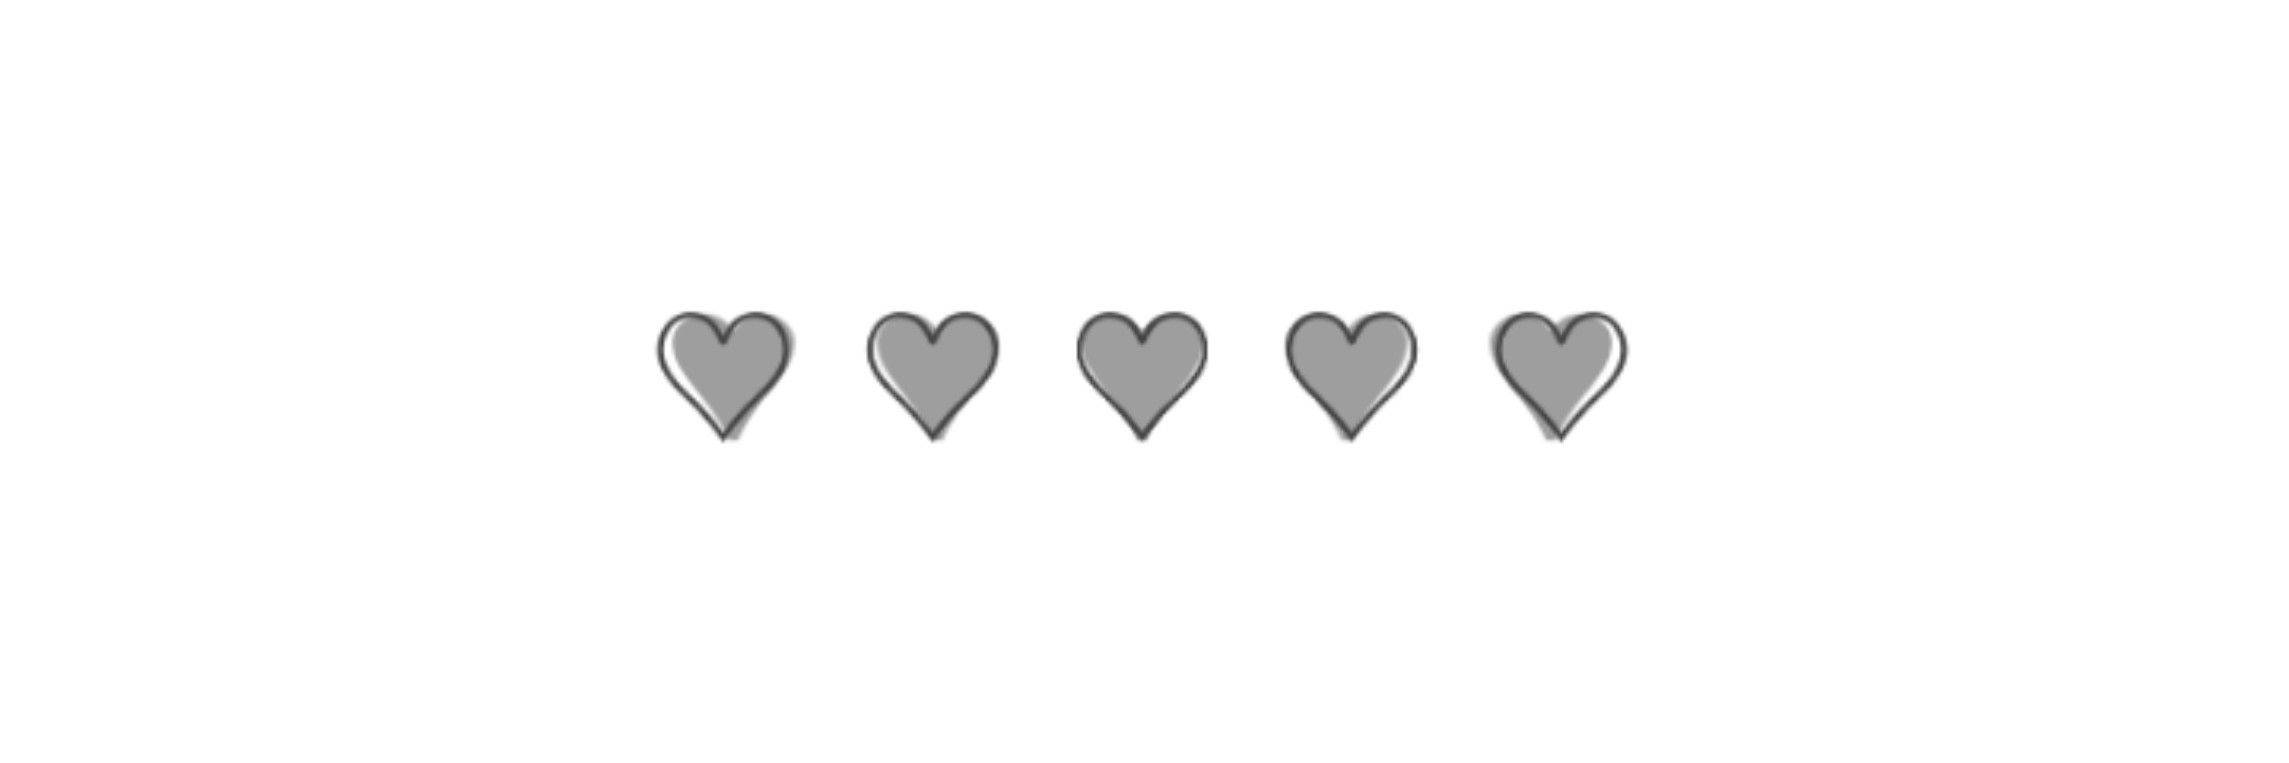 Color White With Gray Hearts Twitter Header Background